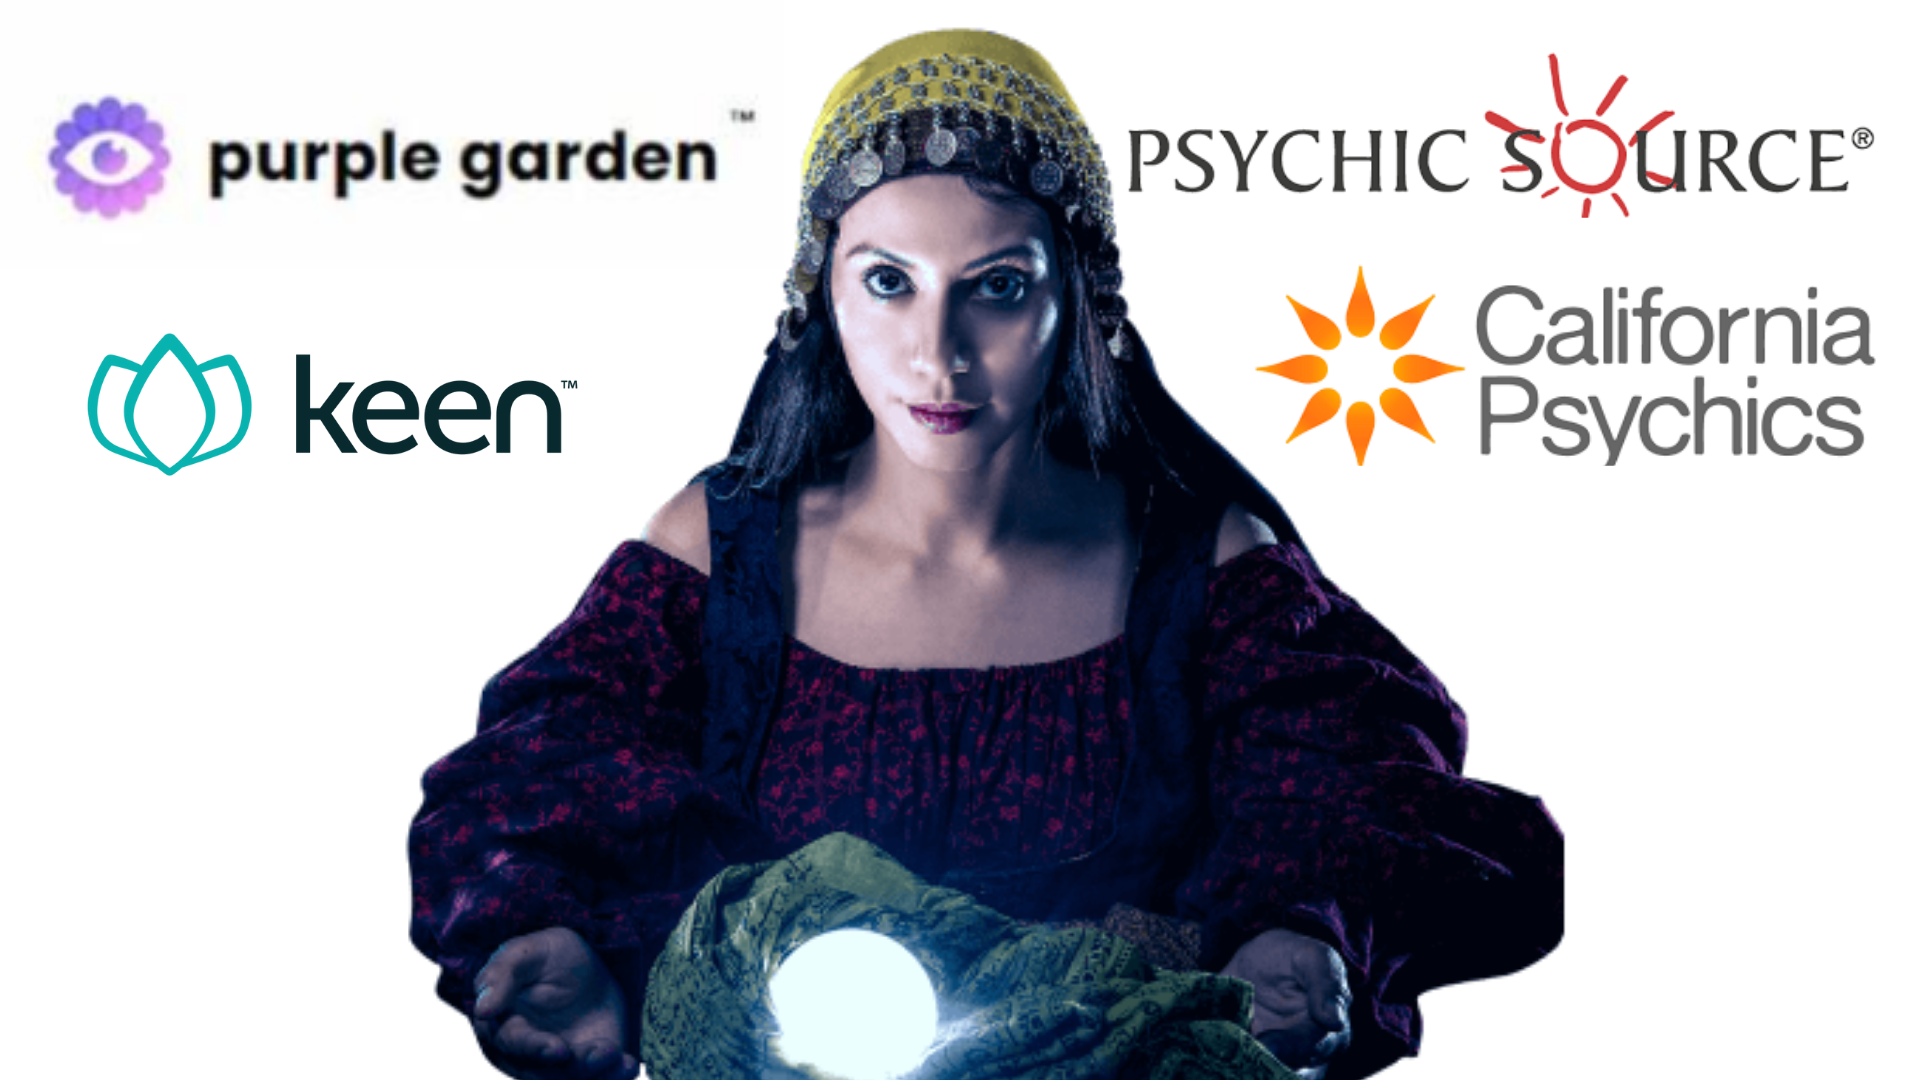 A psychic medium with a crystal ball and psychic sites logo on the background